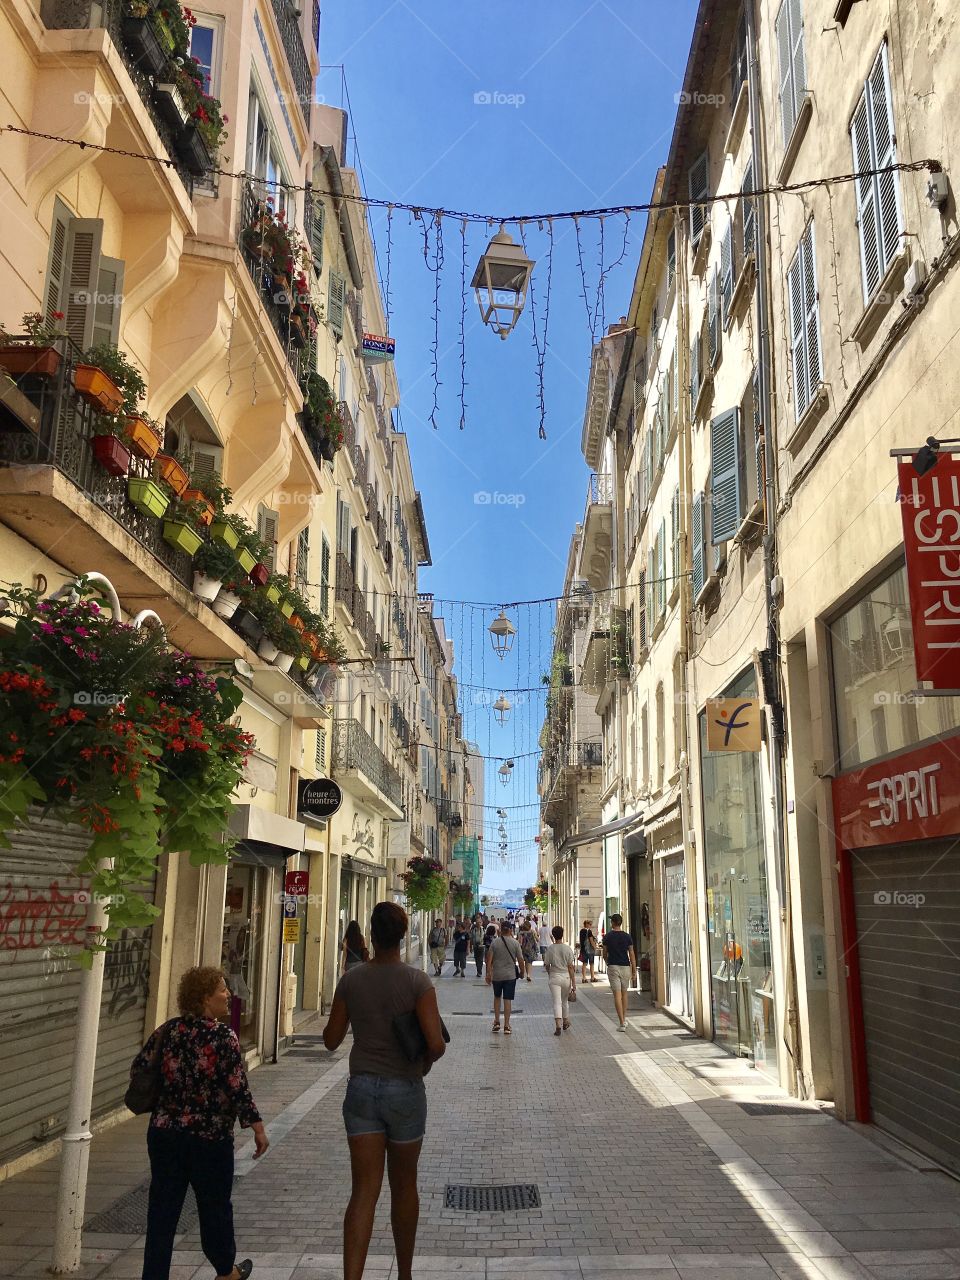 Streets of Toulon🇫🇷